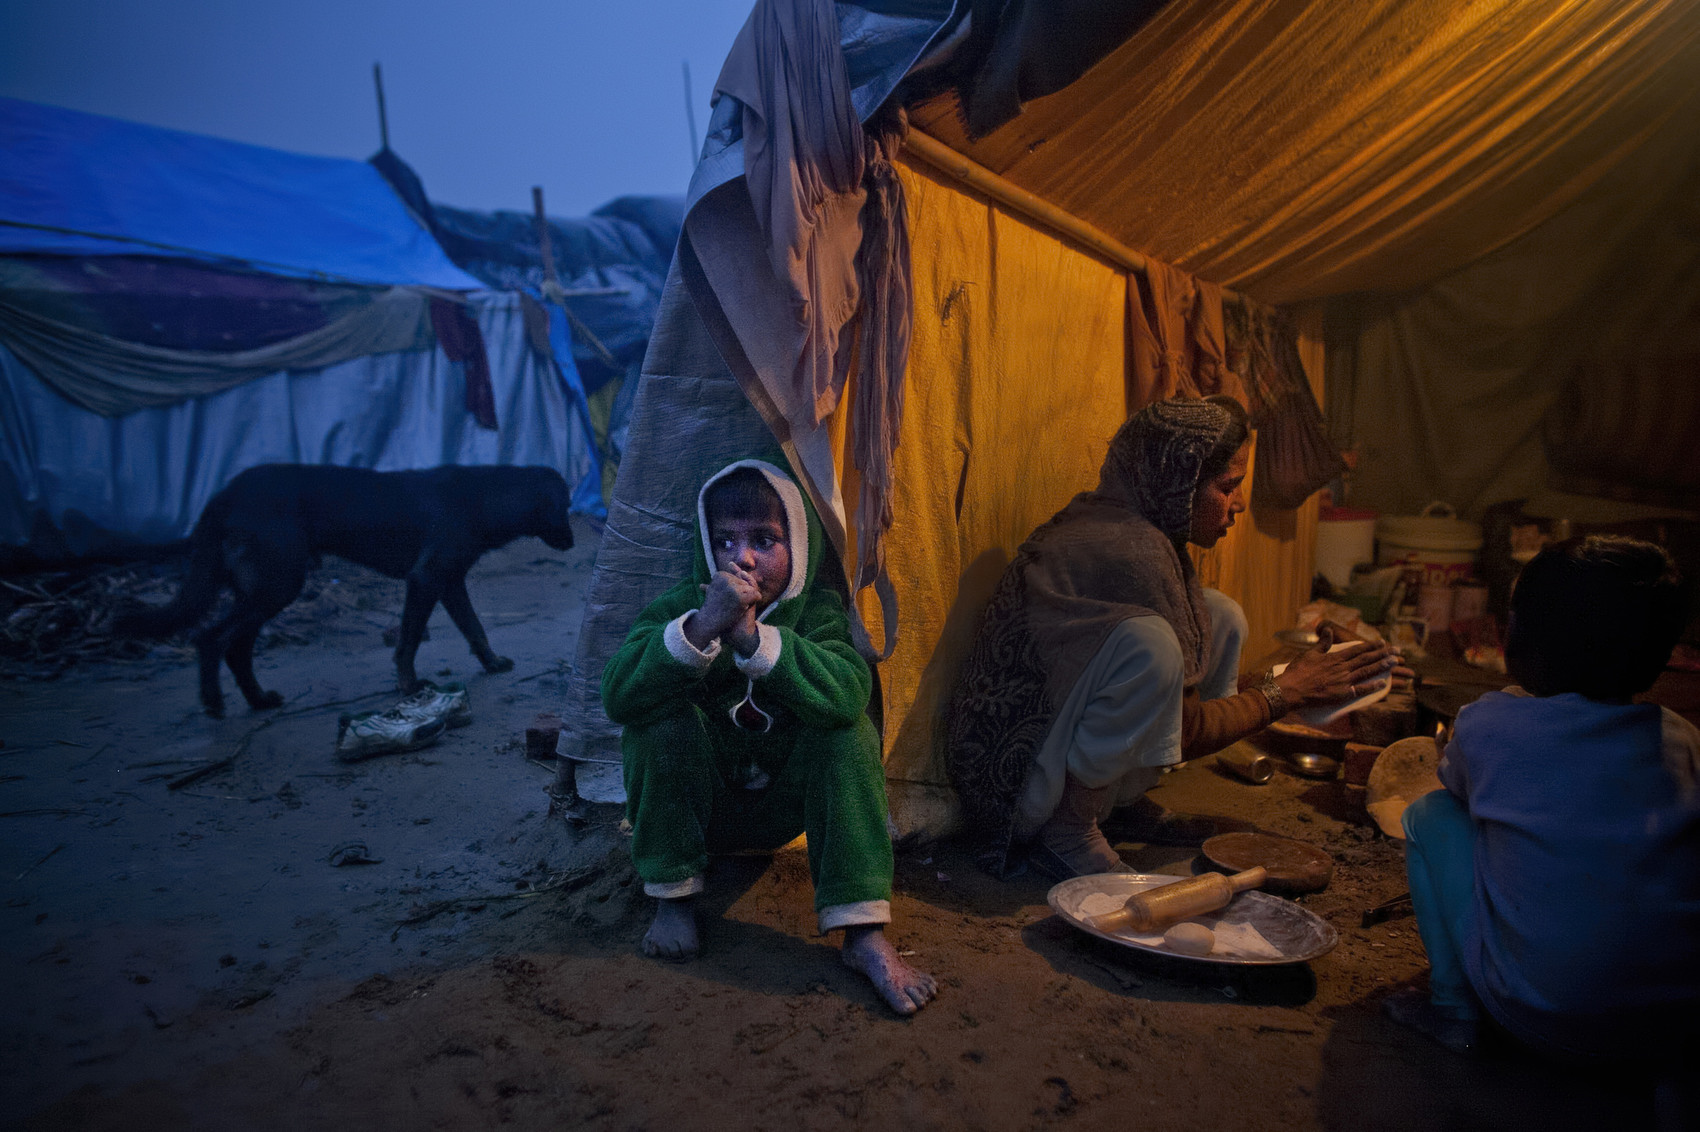 A child sits outside his tent while his mother cooks in the Malakpur relief camp in the Shamli district of Uttar Pradesh, India. Riots between Muslims and Jat Hindus broke out at the end of August and lasted until the beginning of September, 2013. More than 55 people were killed, hundreds were injured, at least 6 women were gang raped, and almost 50,000 people fled to relief camps in the immediate aftermath. The cold winter has led to the death of over 34 children in the relief camps. (Photo by Getty Images/Getty Images)